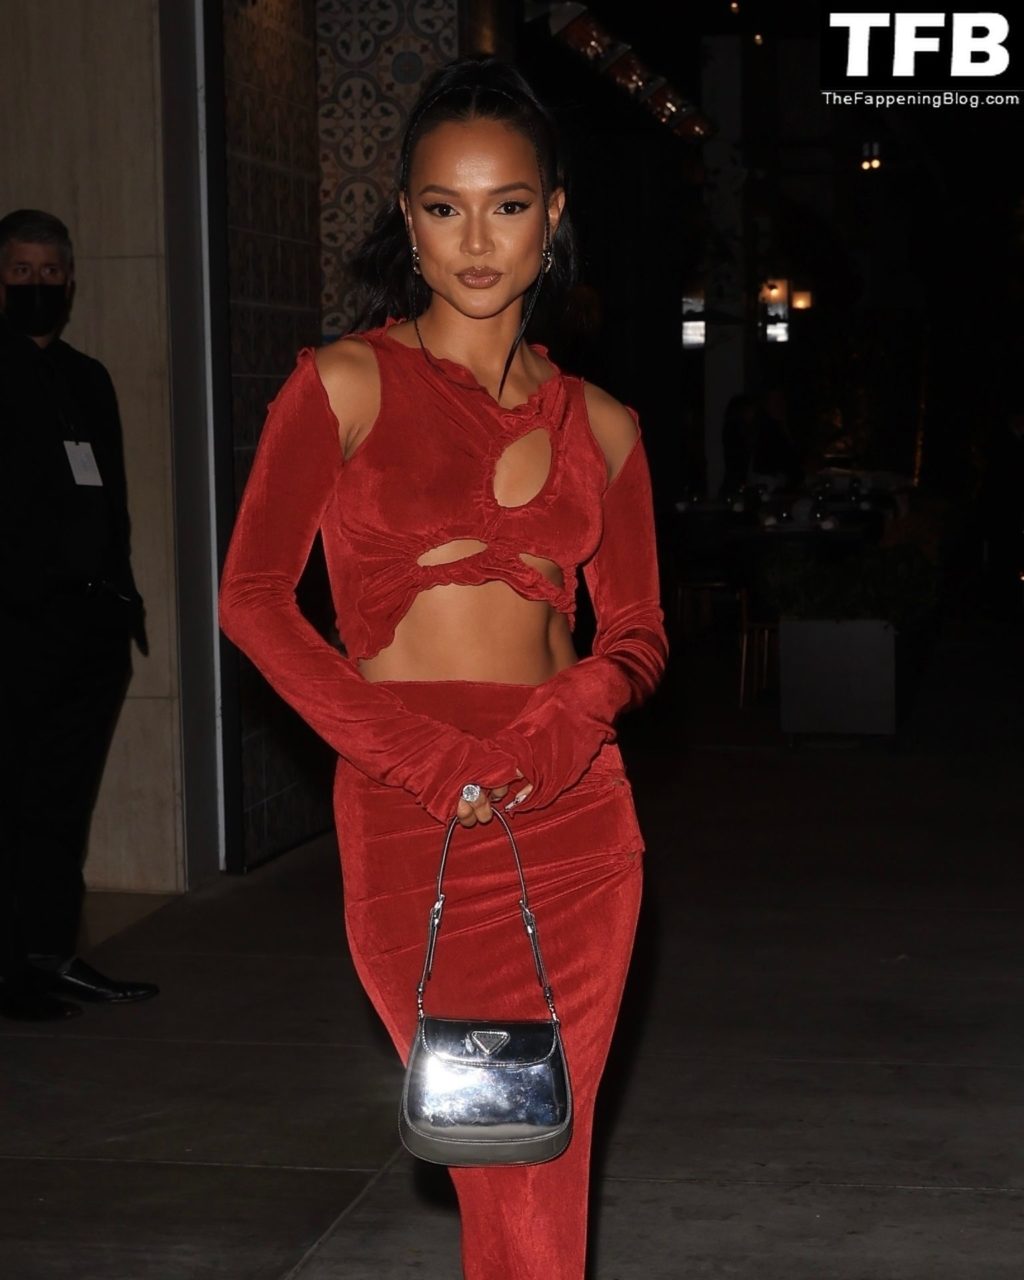 Karrueche Tran Sexy The Fappening Blog 5 1 1024x1280 - Karrueche Tran Shows Her Pokies in a Red Dress at The Hollywood Reporter’s Oscar Nominees Night (68 Photos)